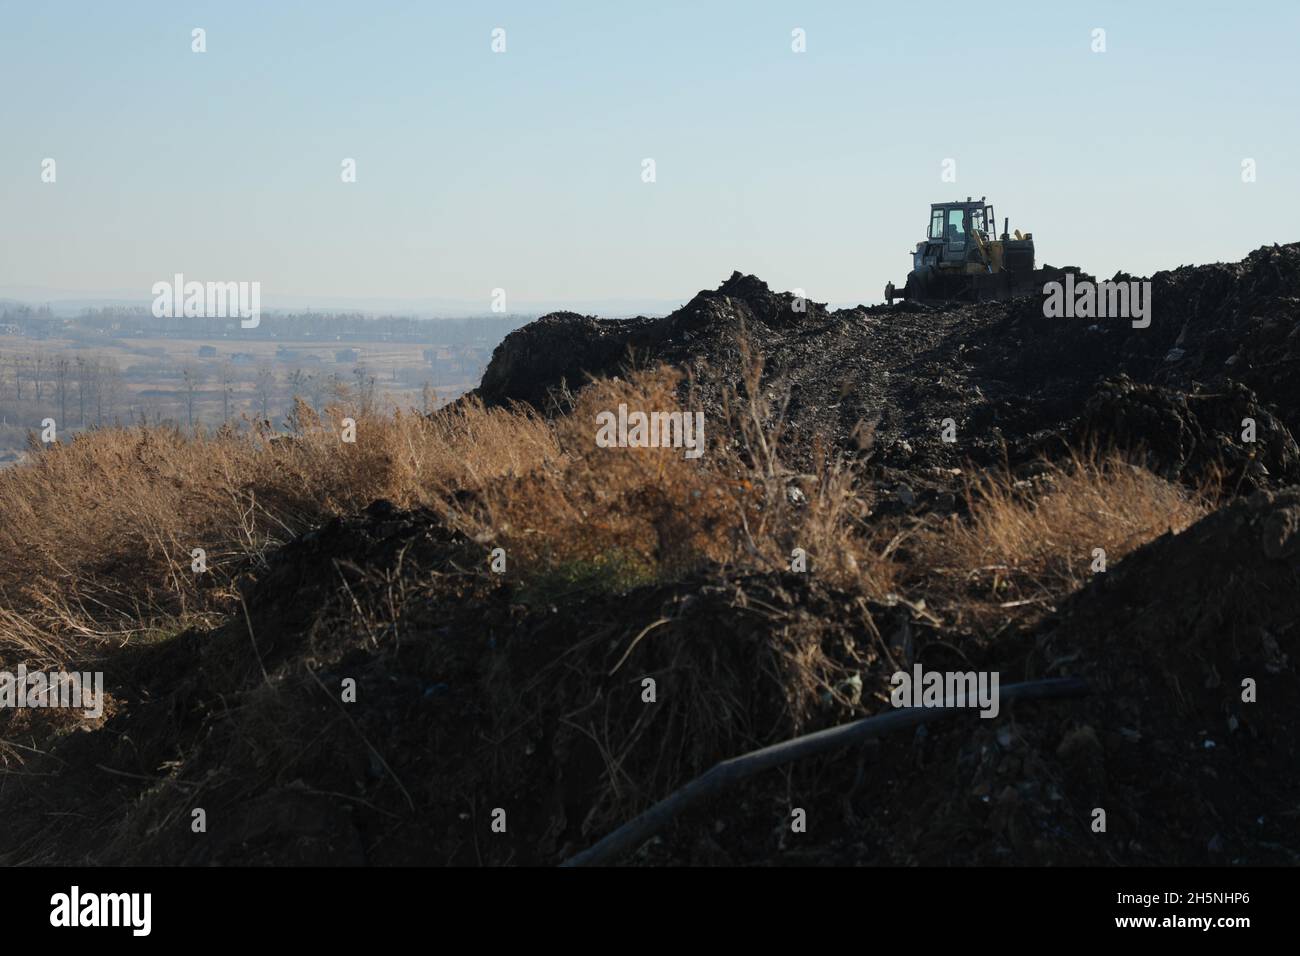 An excavator seen at the Hrybovytchi landfill which is under reclamation (artificial restoration of soil fertility and vegetation after man-made disturbance of nature). The only legal place for garbage collection from Lviv and surrounding villages. It has been operating since 1958 close to the village of Velyki Hrybovychi. The landfill area is over 38 hectares. On May 28, 2016, a large fire broke out on the territory of the Hrybovytsia landfill causing a collapse of solid waste where three rescuers died under the rubble. Stock Photo